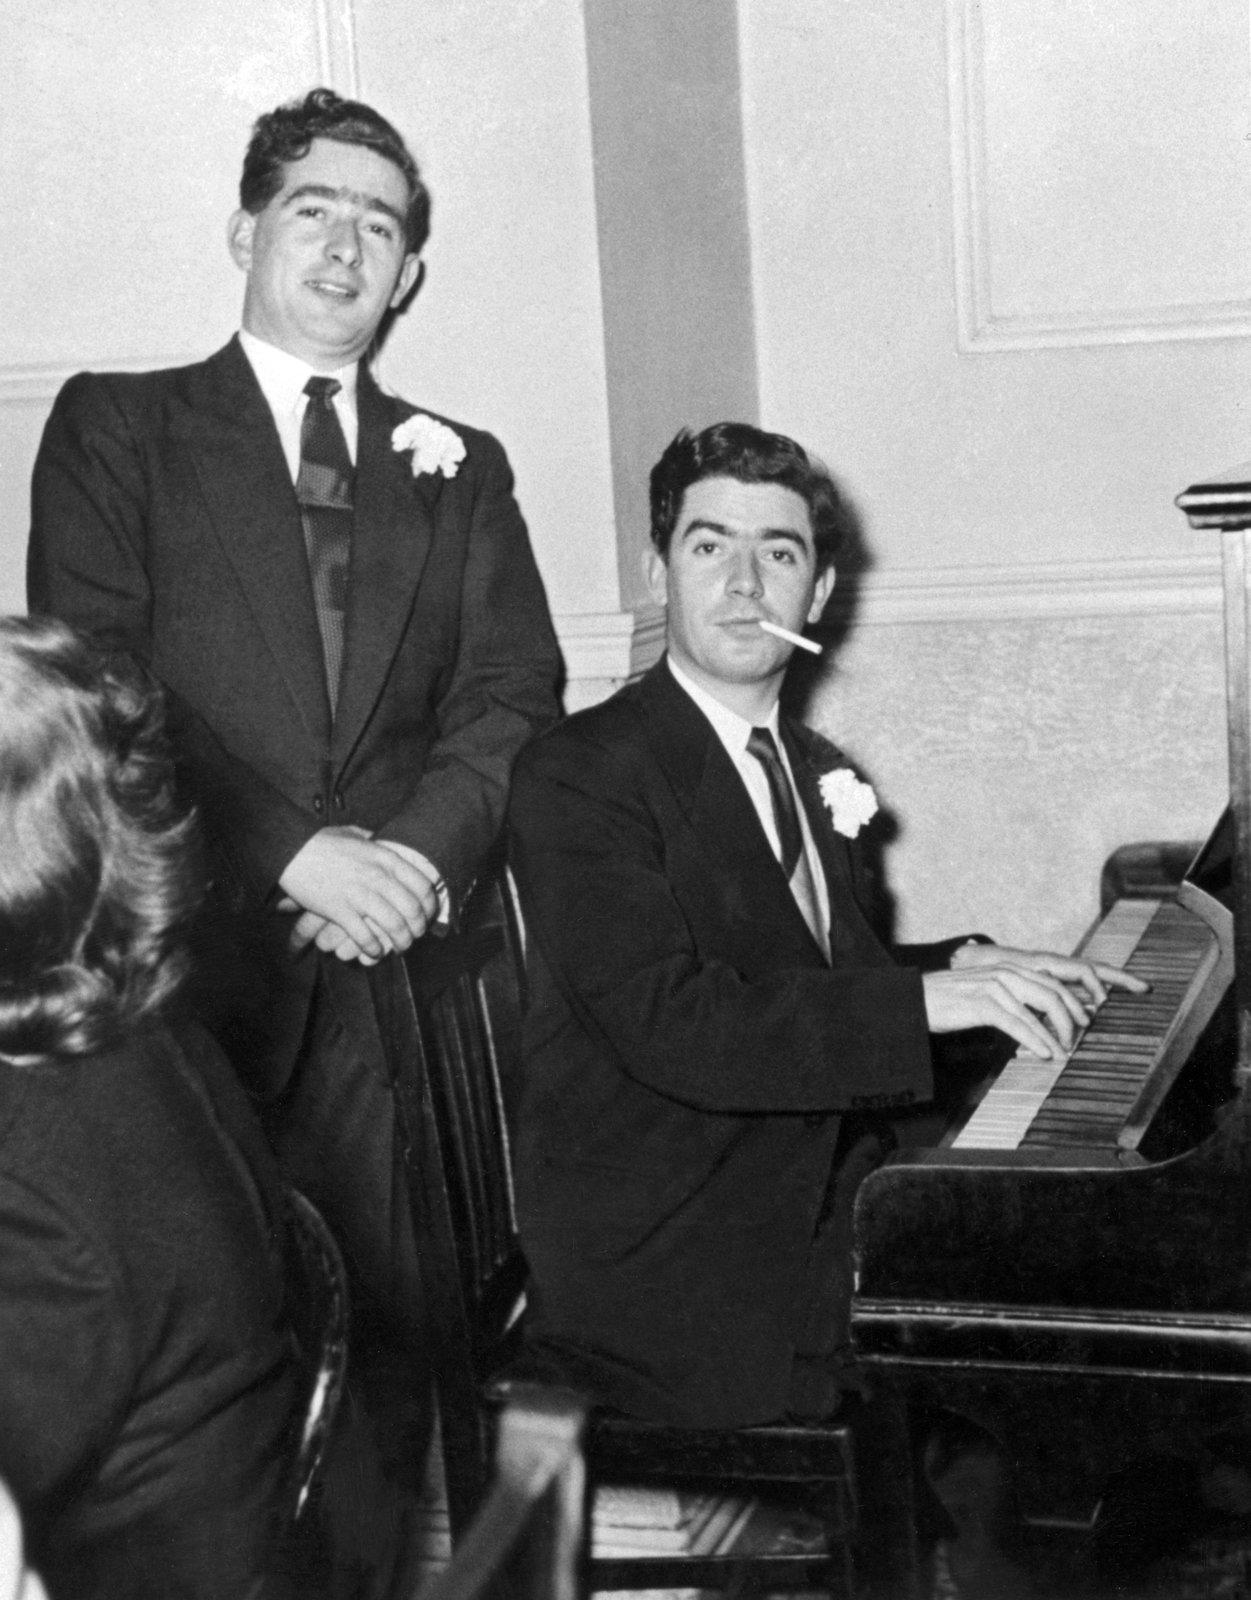 Frank and Desi Courtney, twin brothers of Kevin, entertaining at Kevin and Kay's wedding, 30 September 1953.